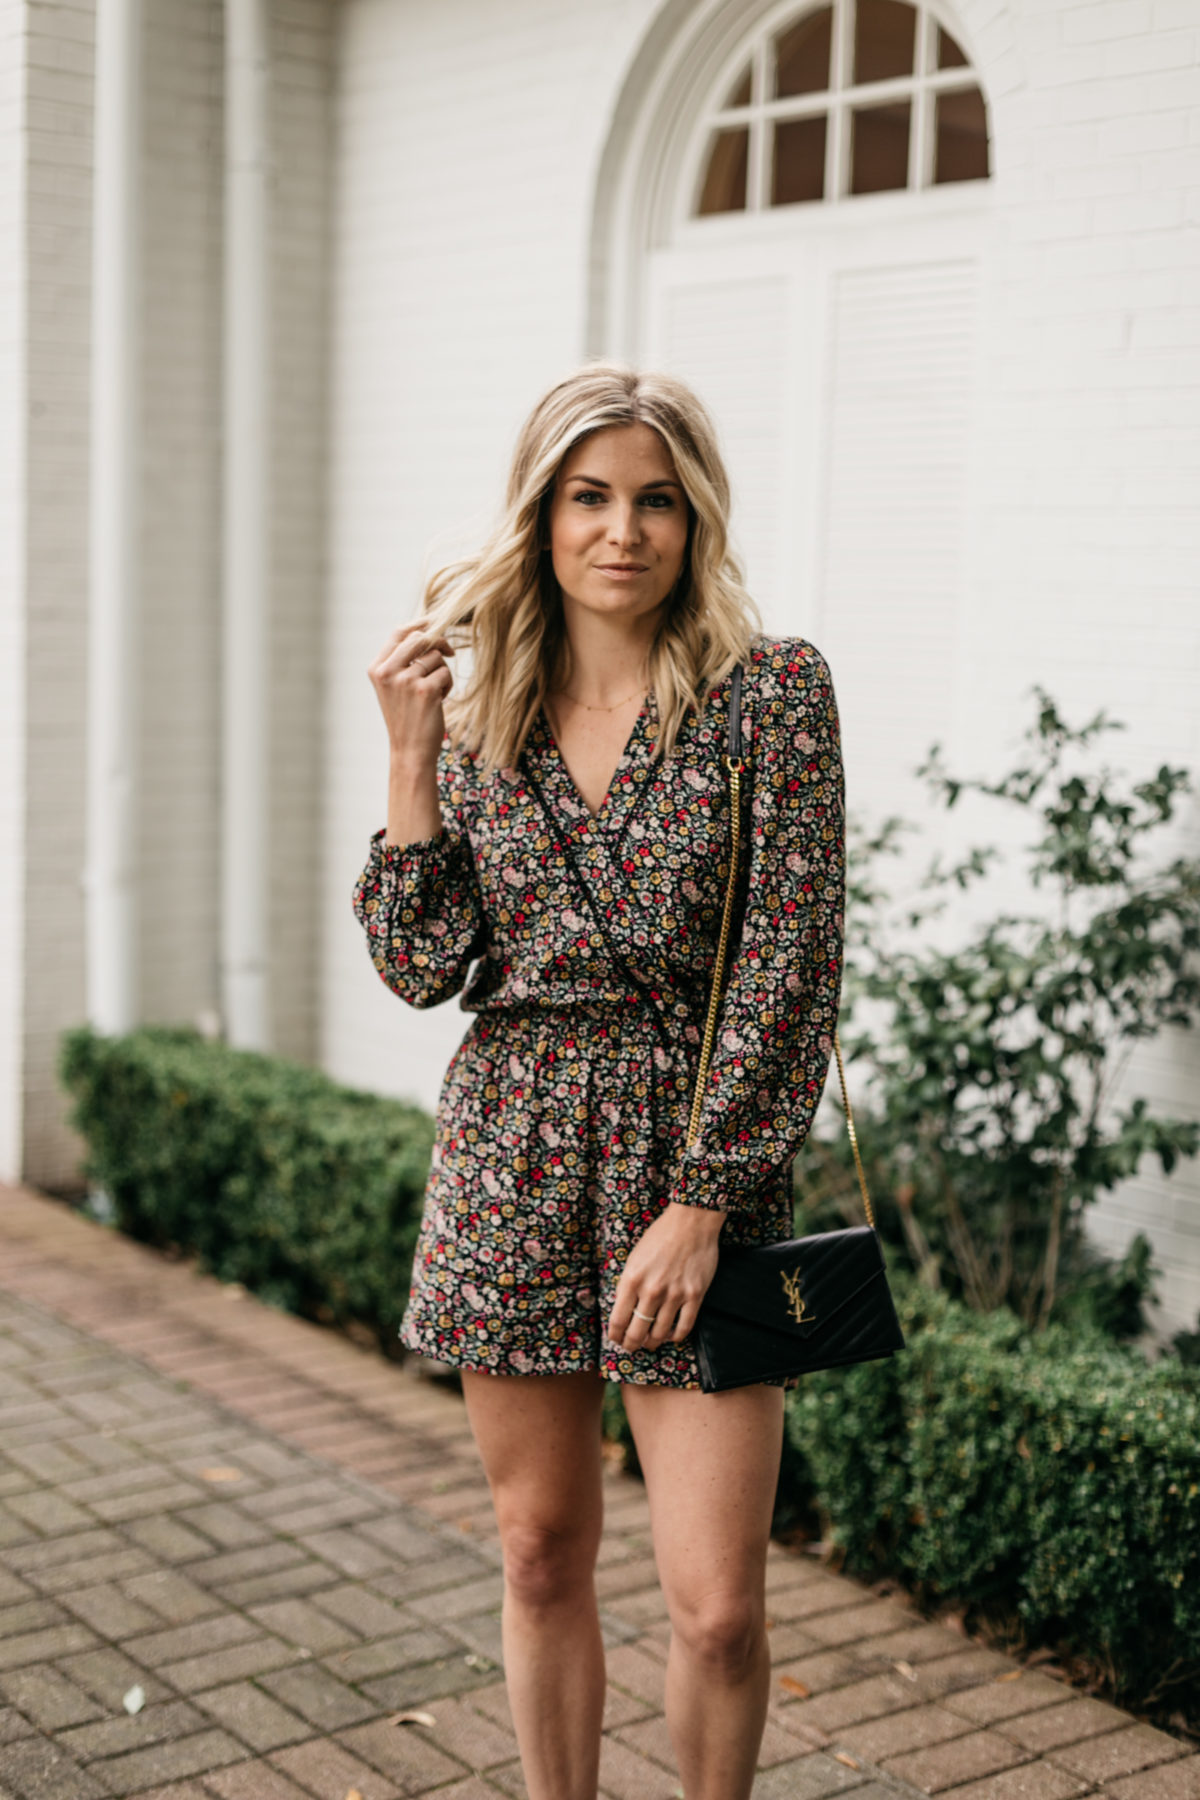 Brooke's outfit details: Floral Romper // YSL Crossbody